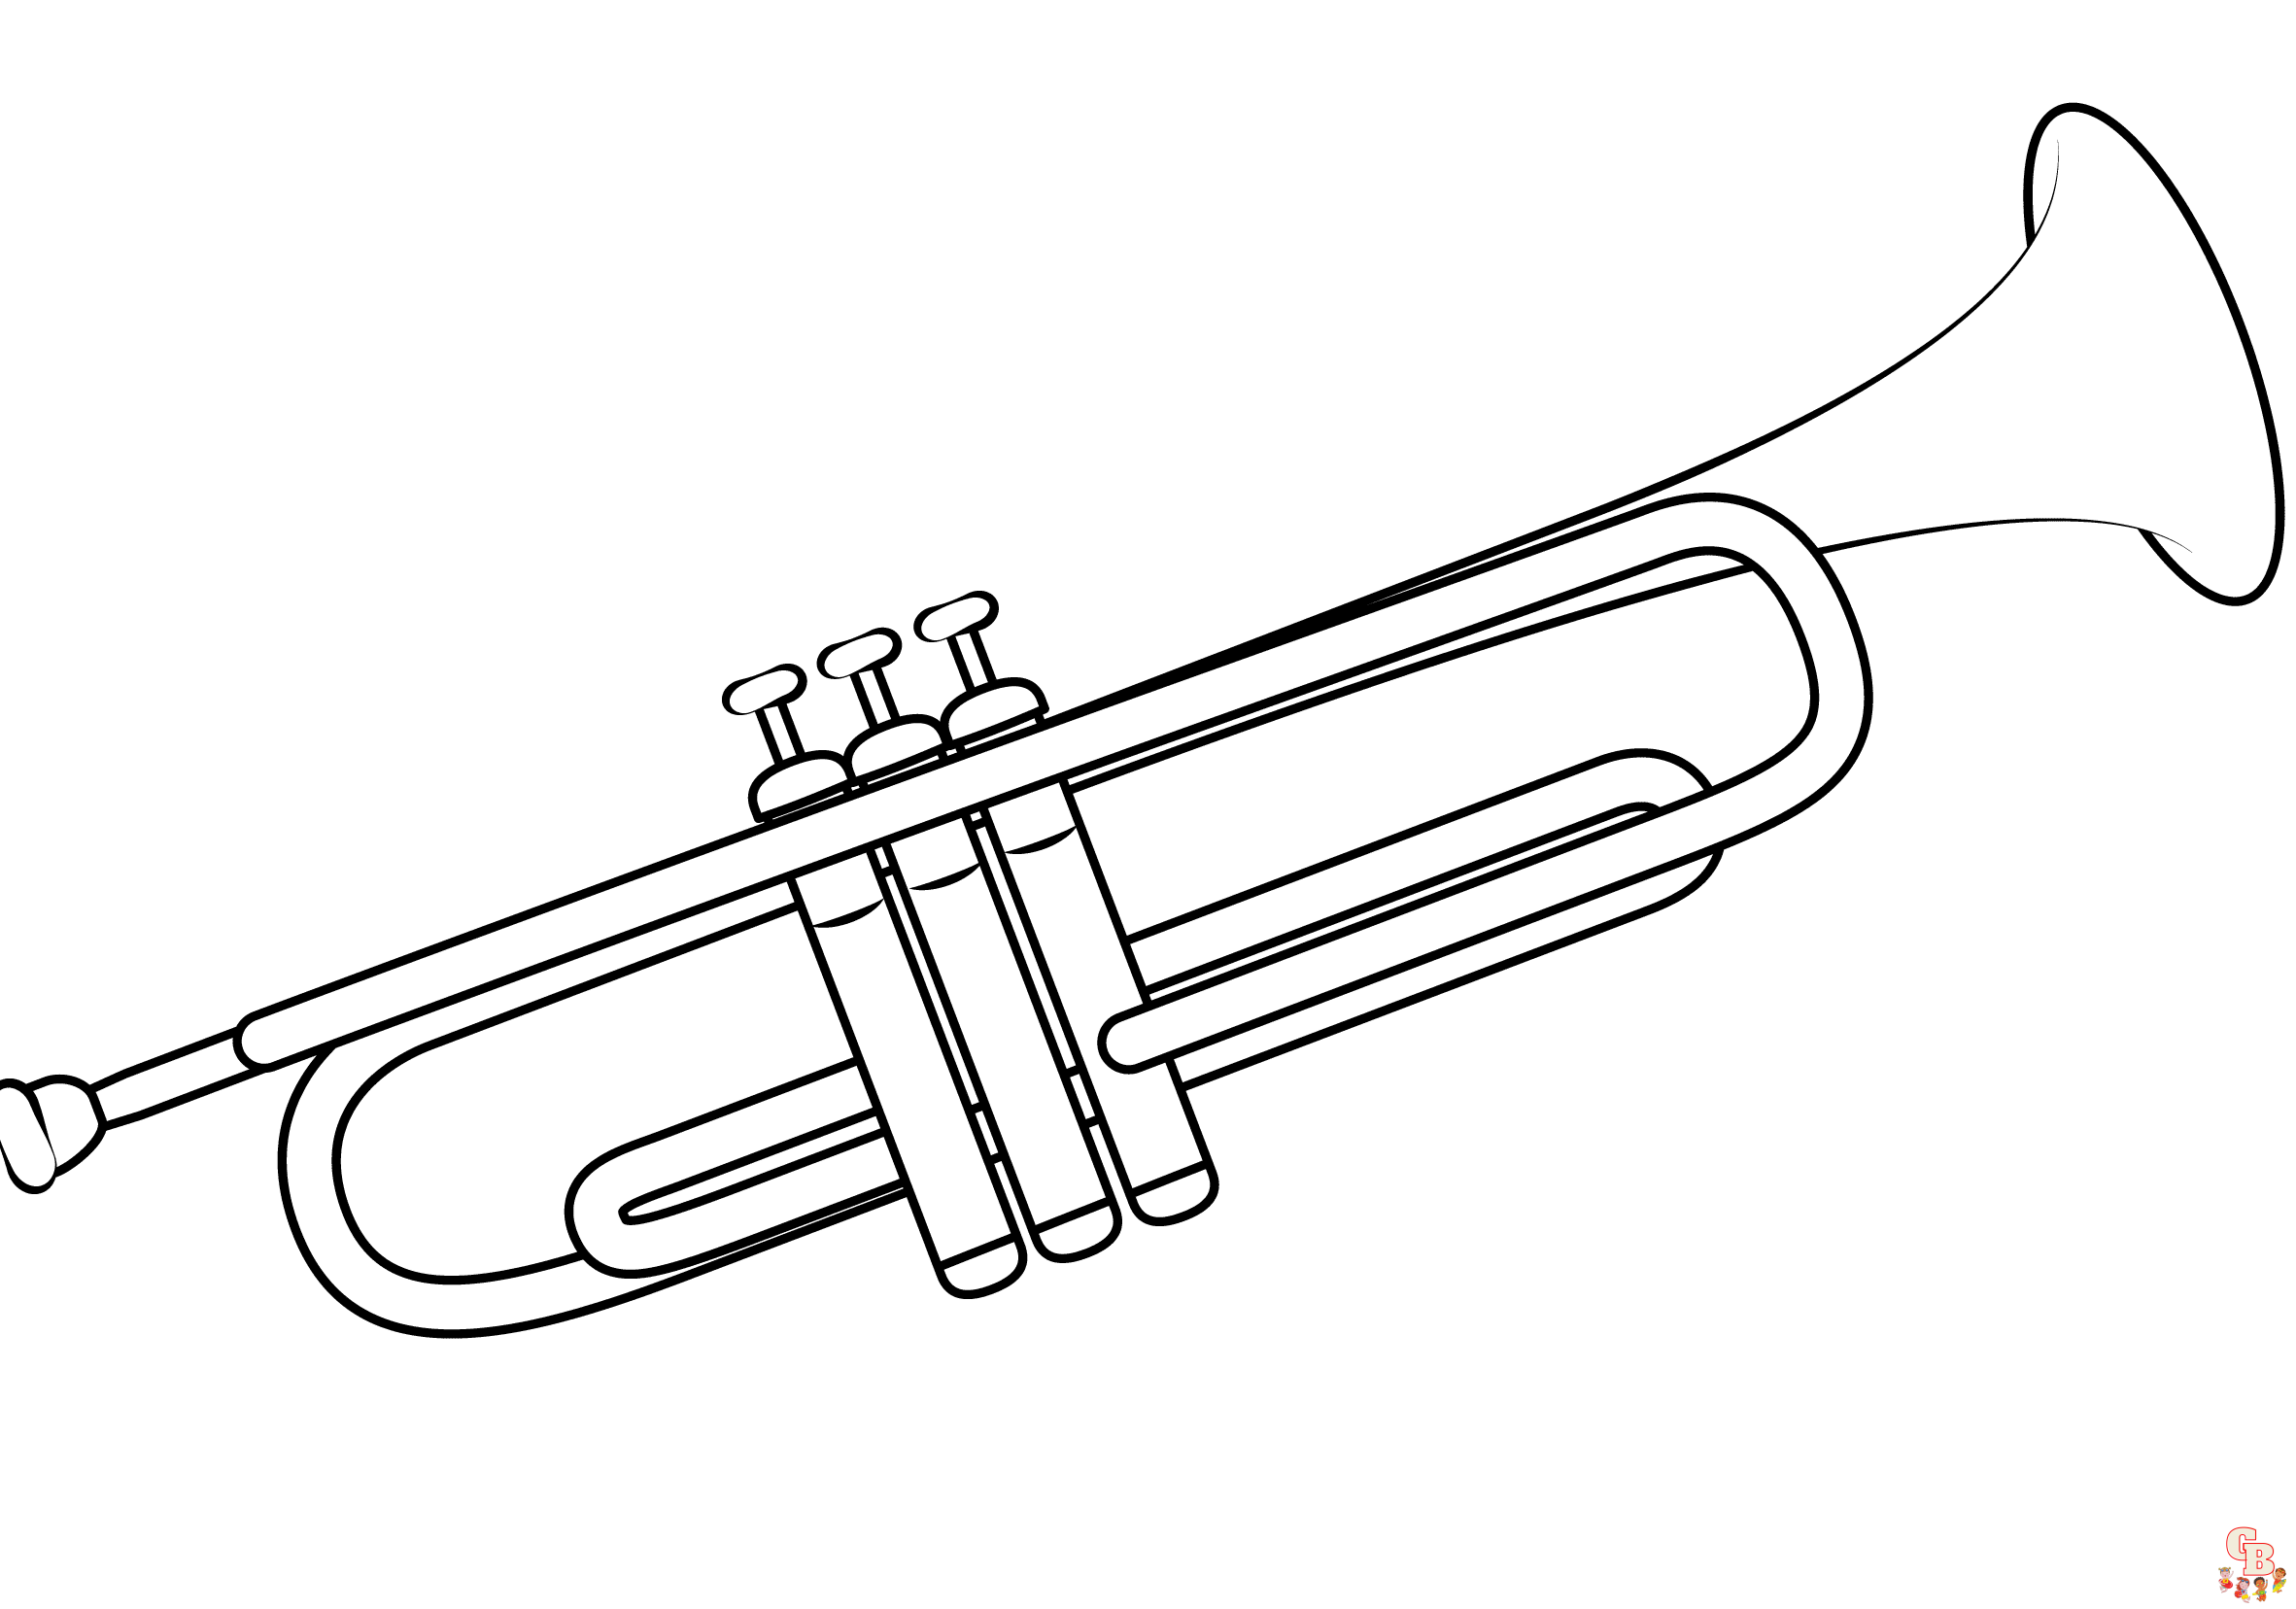 Trumpet coloring pages to print